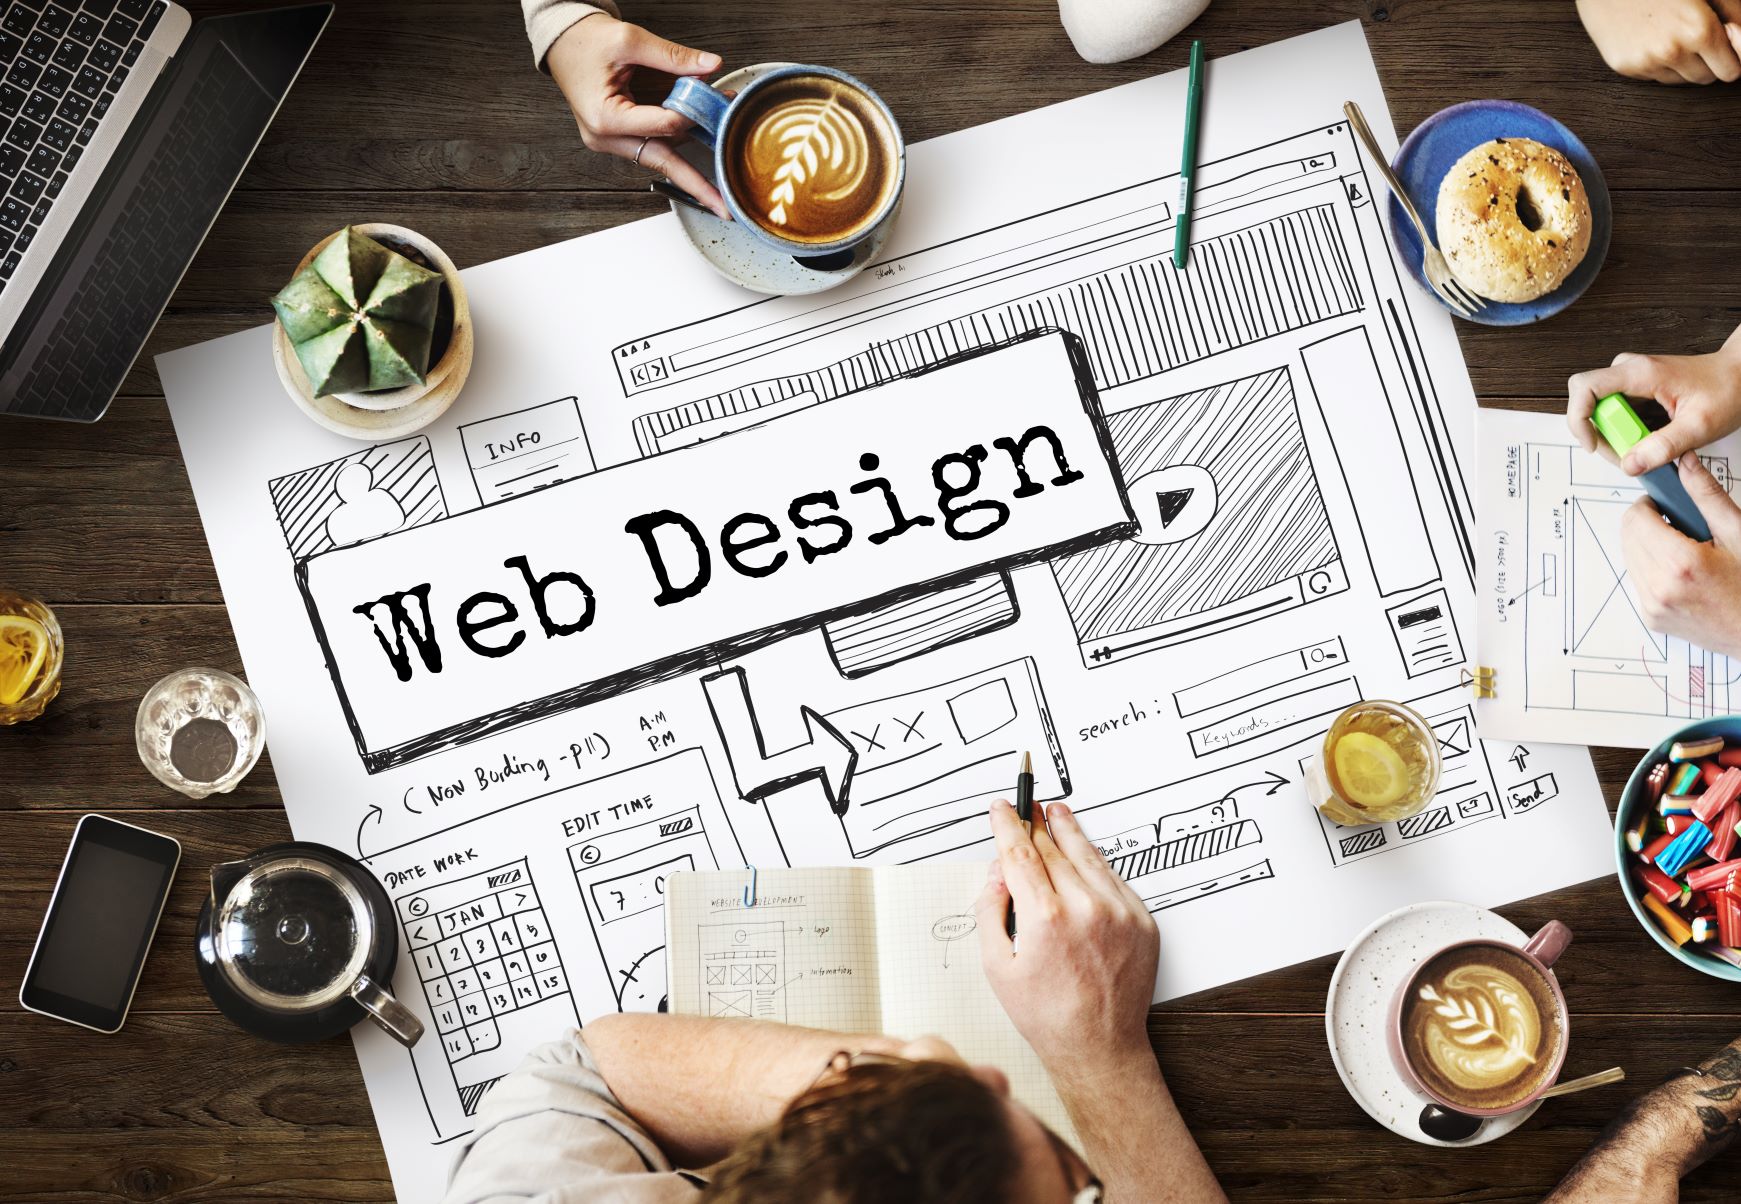 4 Common Mistakes Of Web Design And How To Avoid Them